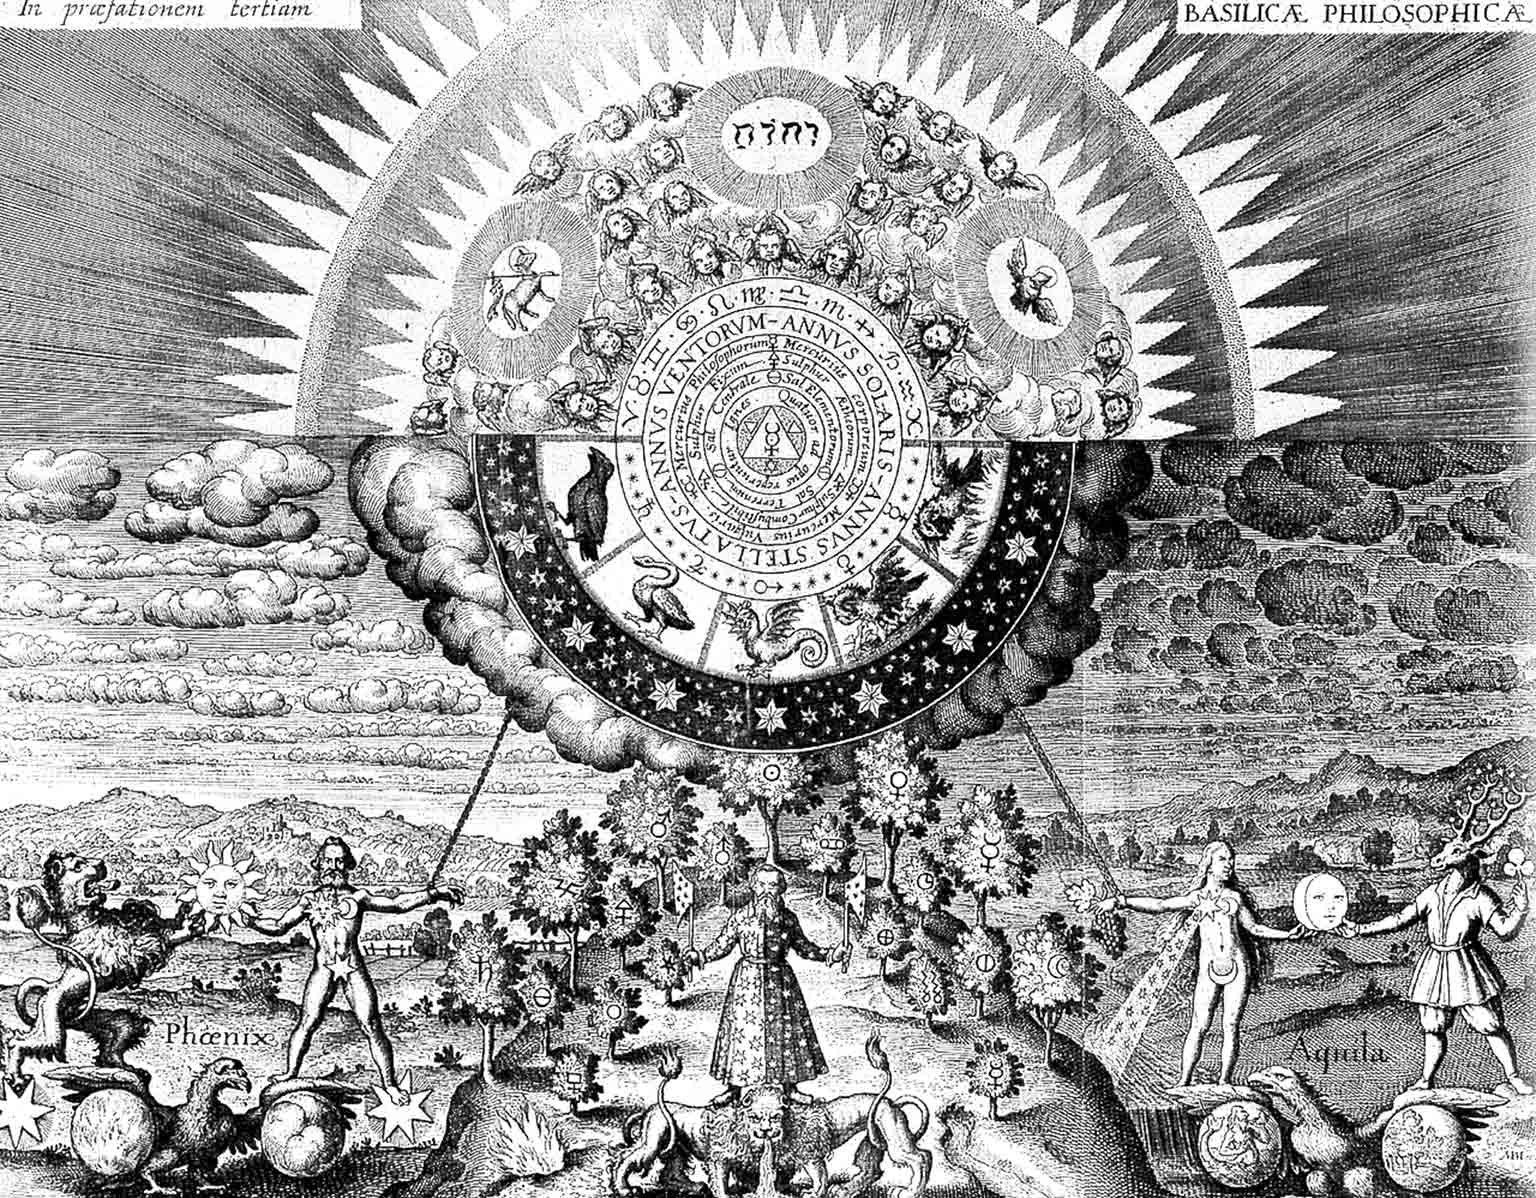 Alchemical illustration in the Basilica Philosophica from 1618